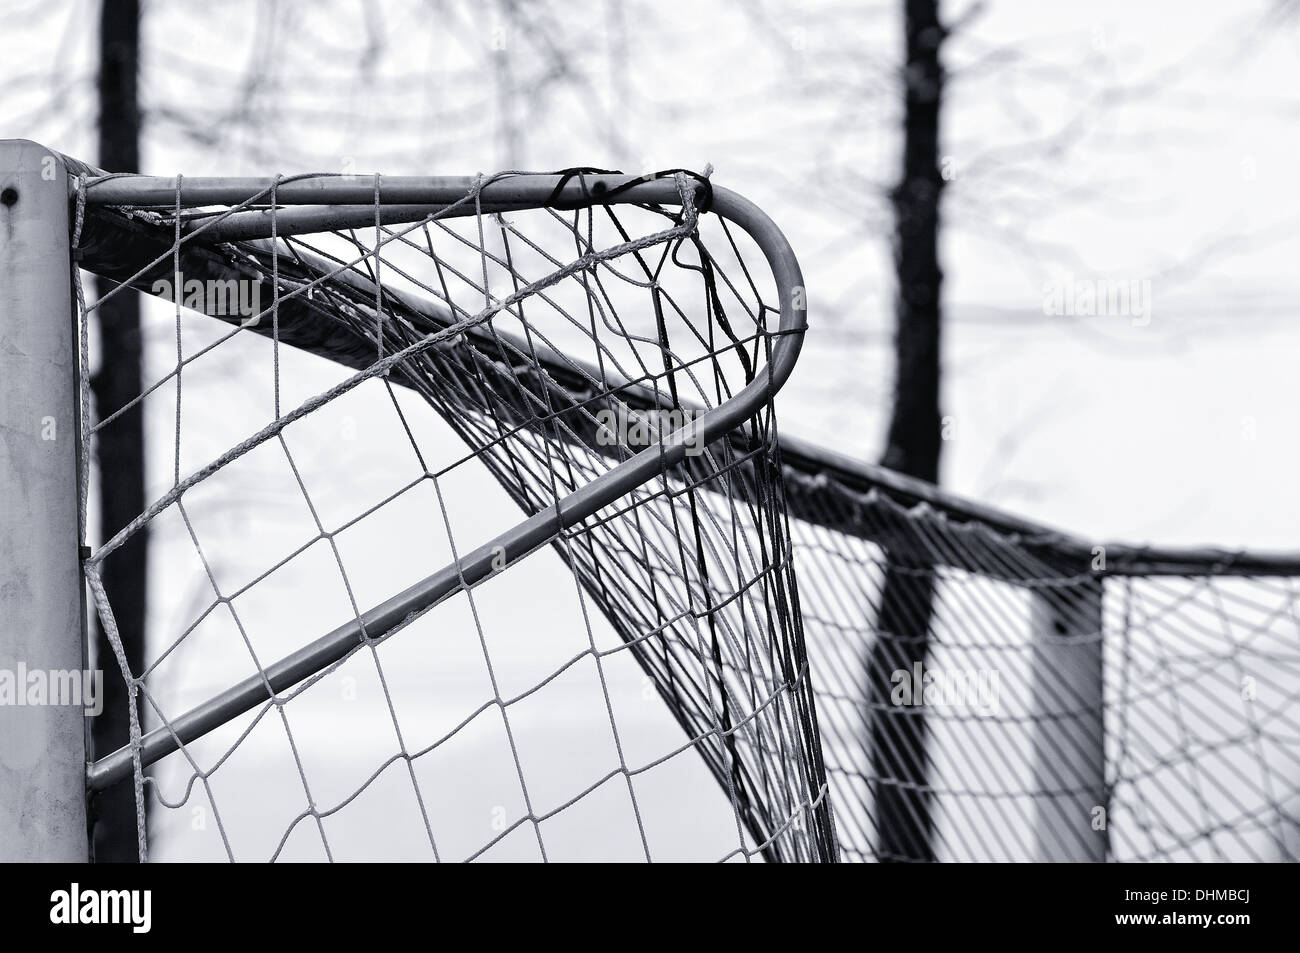 behind the soccer goal monochrome Stock Photo - Alamy